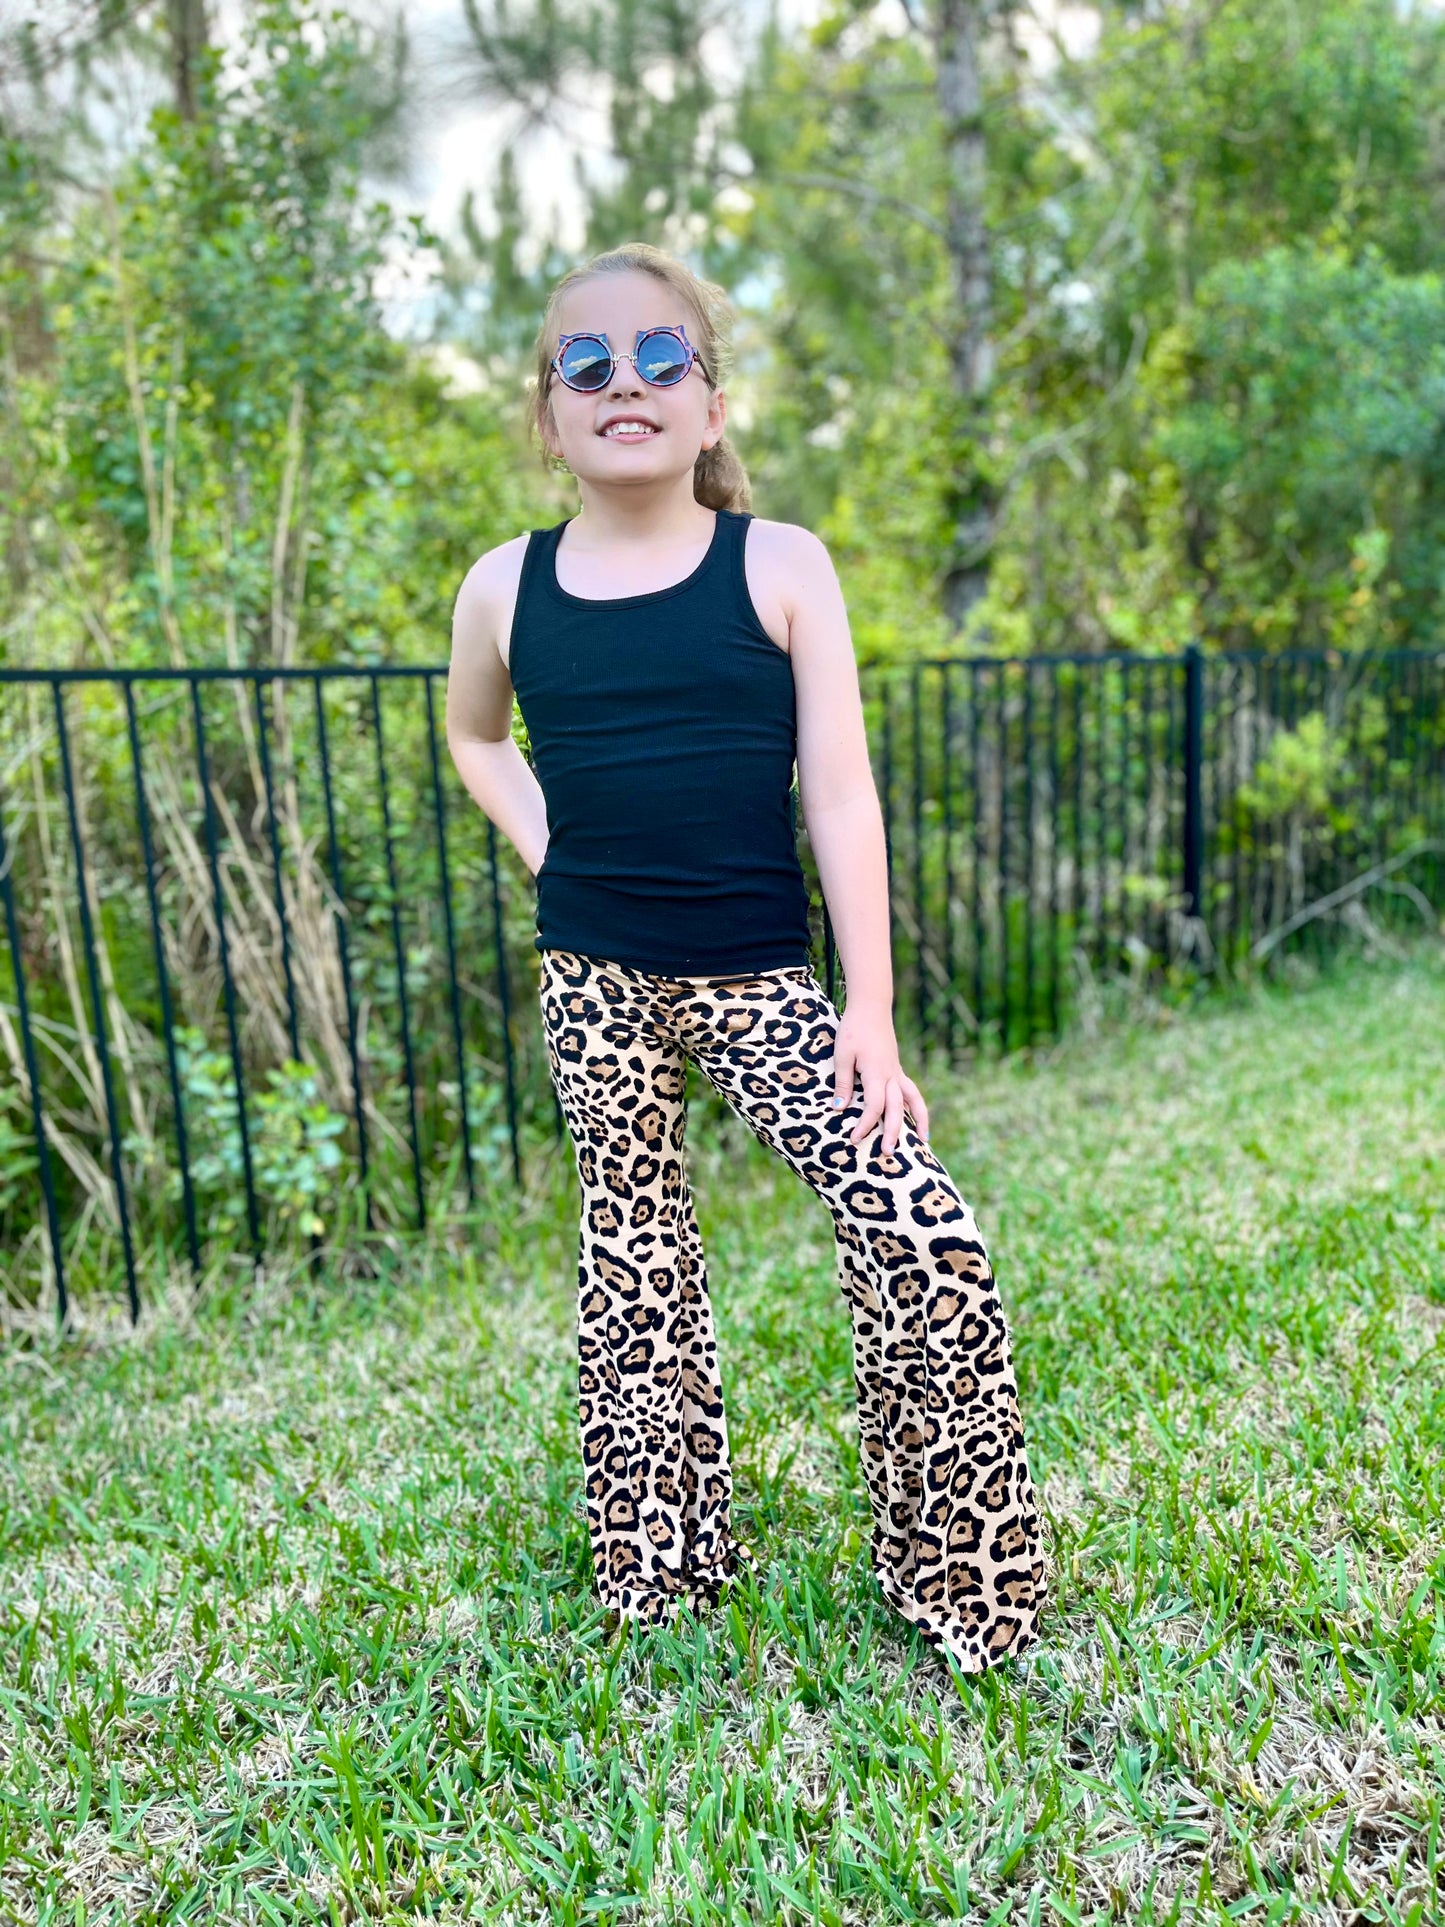 Bellbottoms for girls in cheetah print